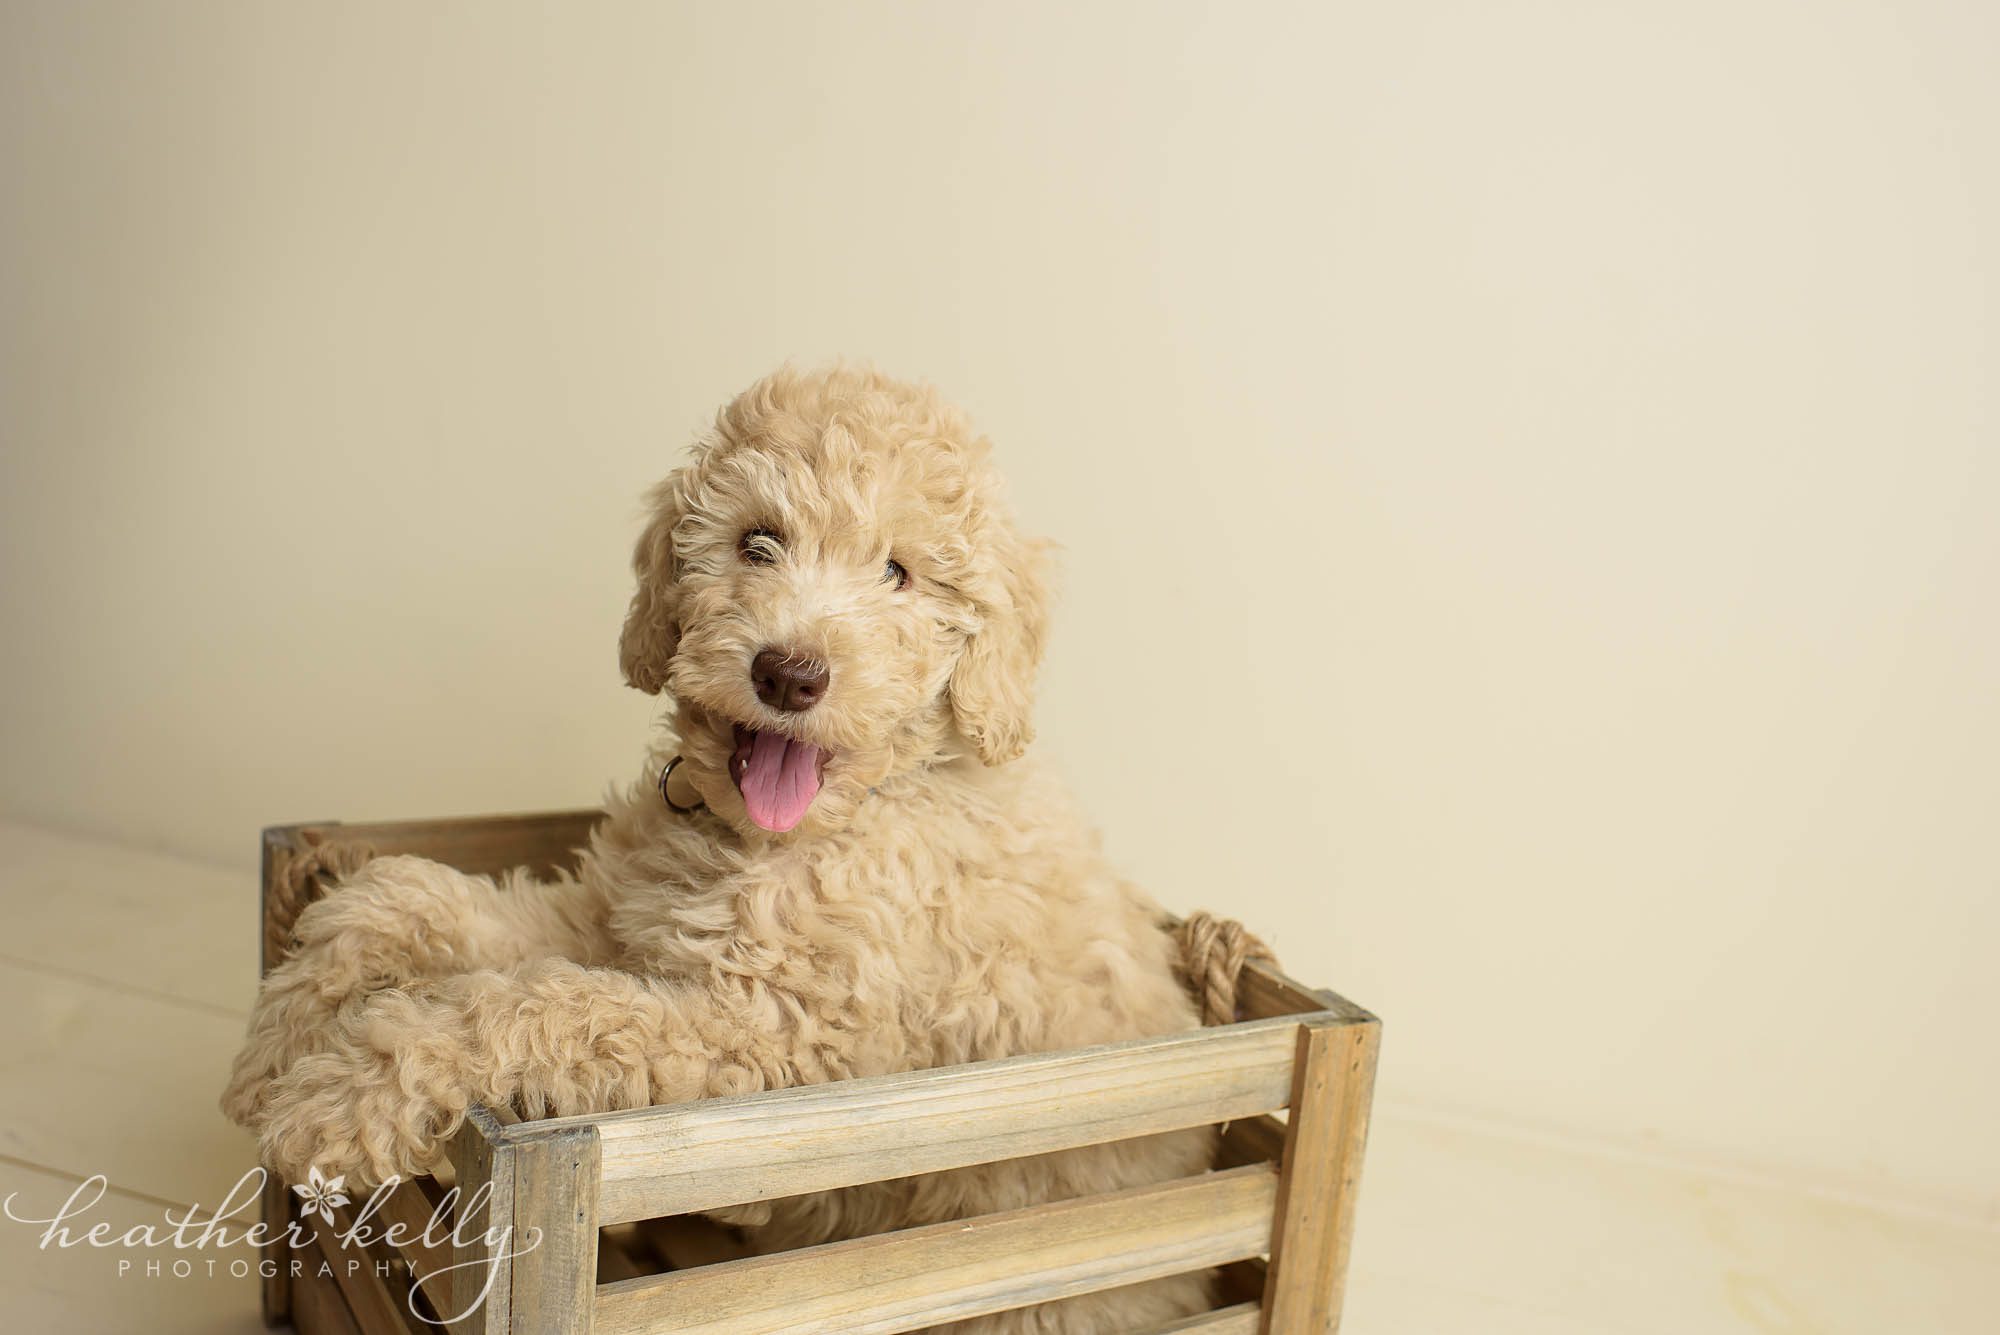 ct puppy photography in crate. exceptional partner service dogs